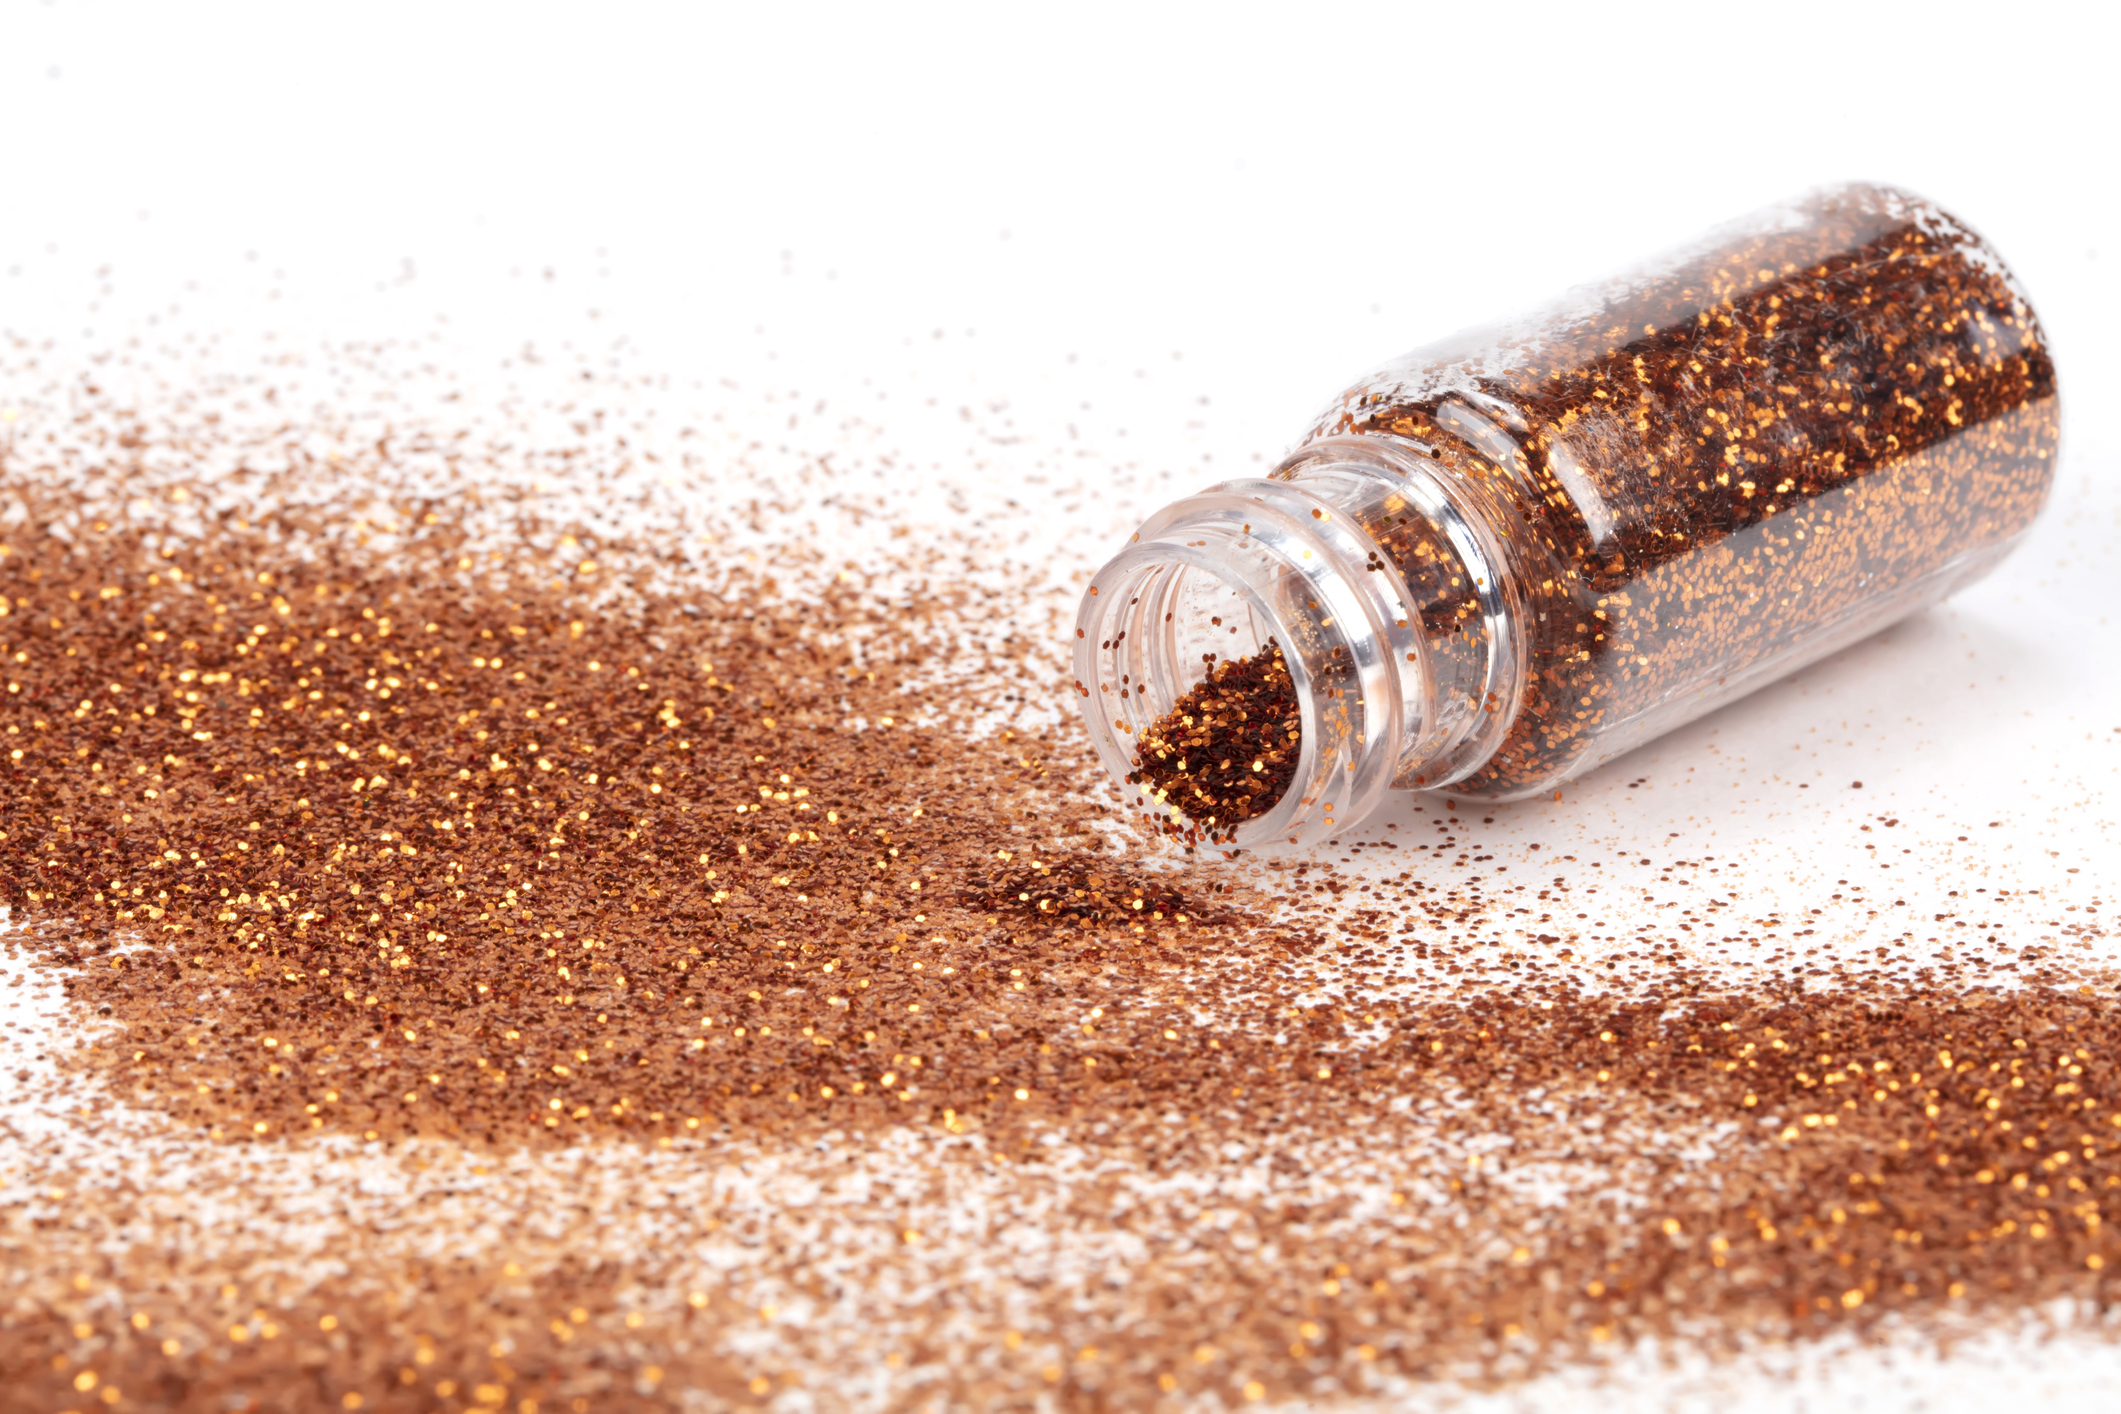 Spilled bottle of glitter, suggesting a metaphor for spicing up romance